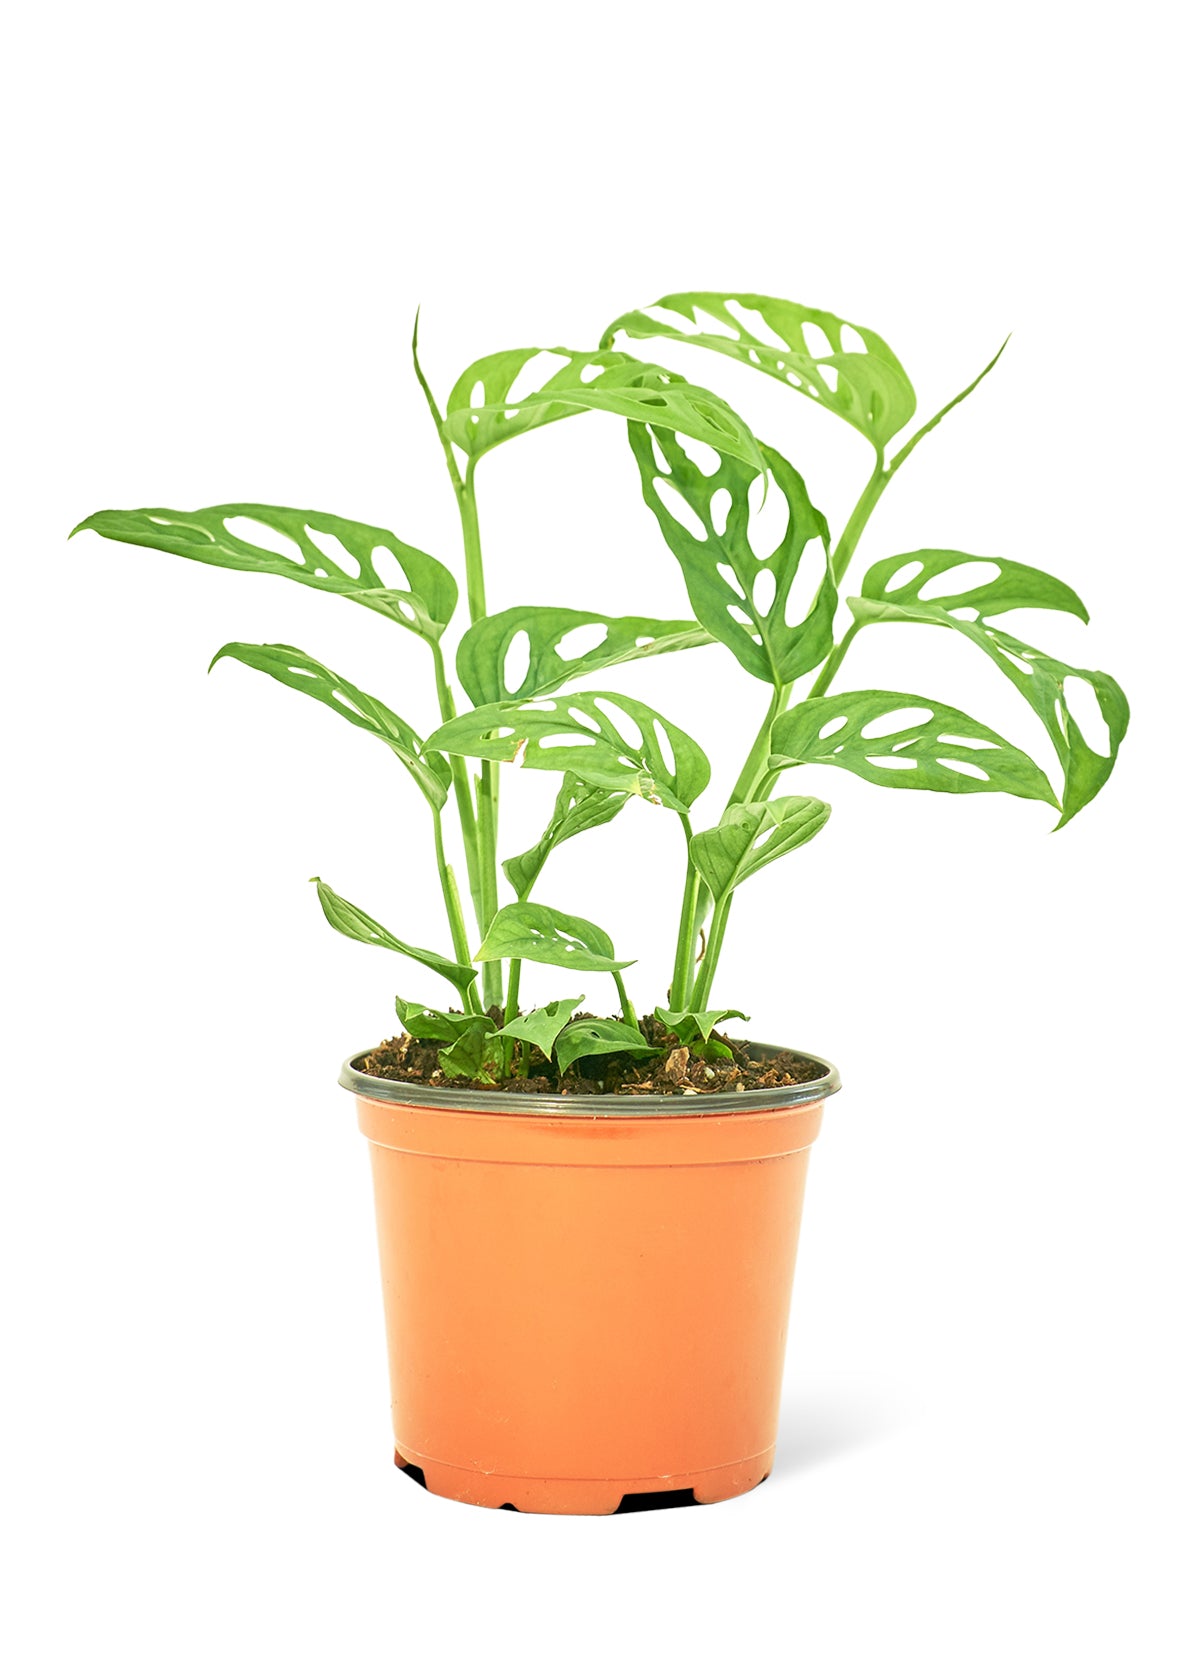 Medium size Swiss Cheese Vine Plant in a growers pot with a white background